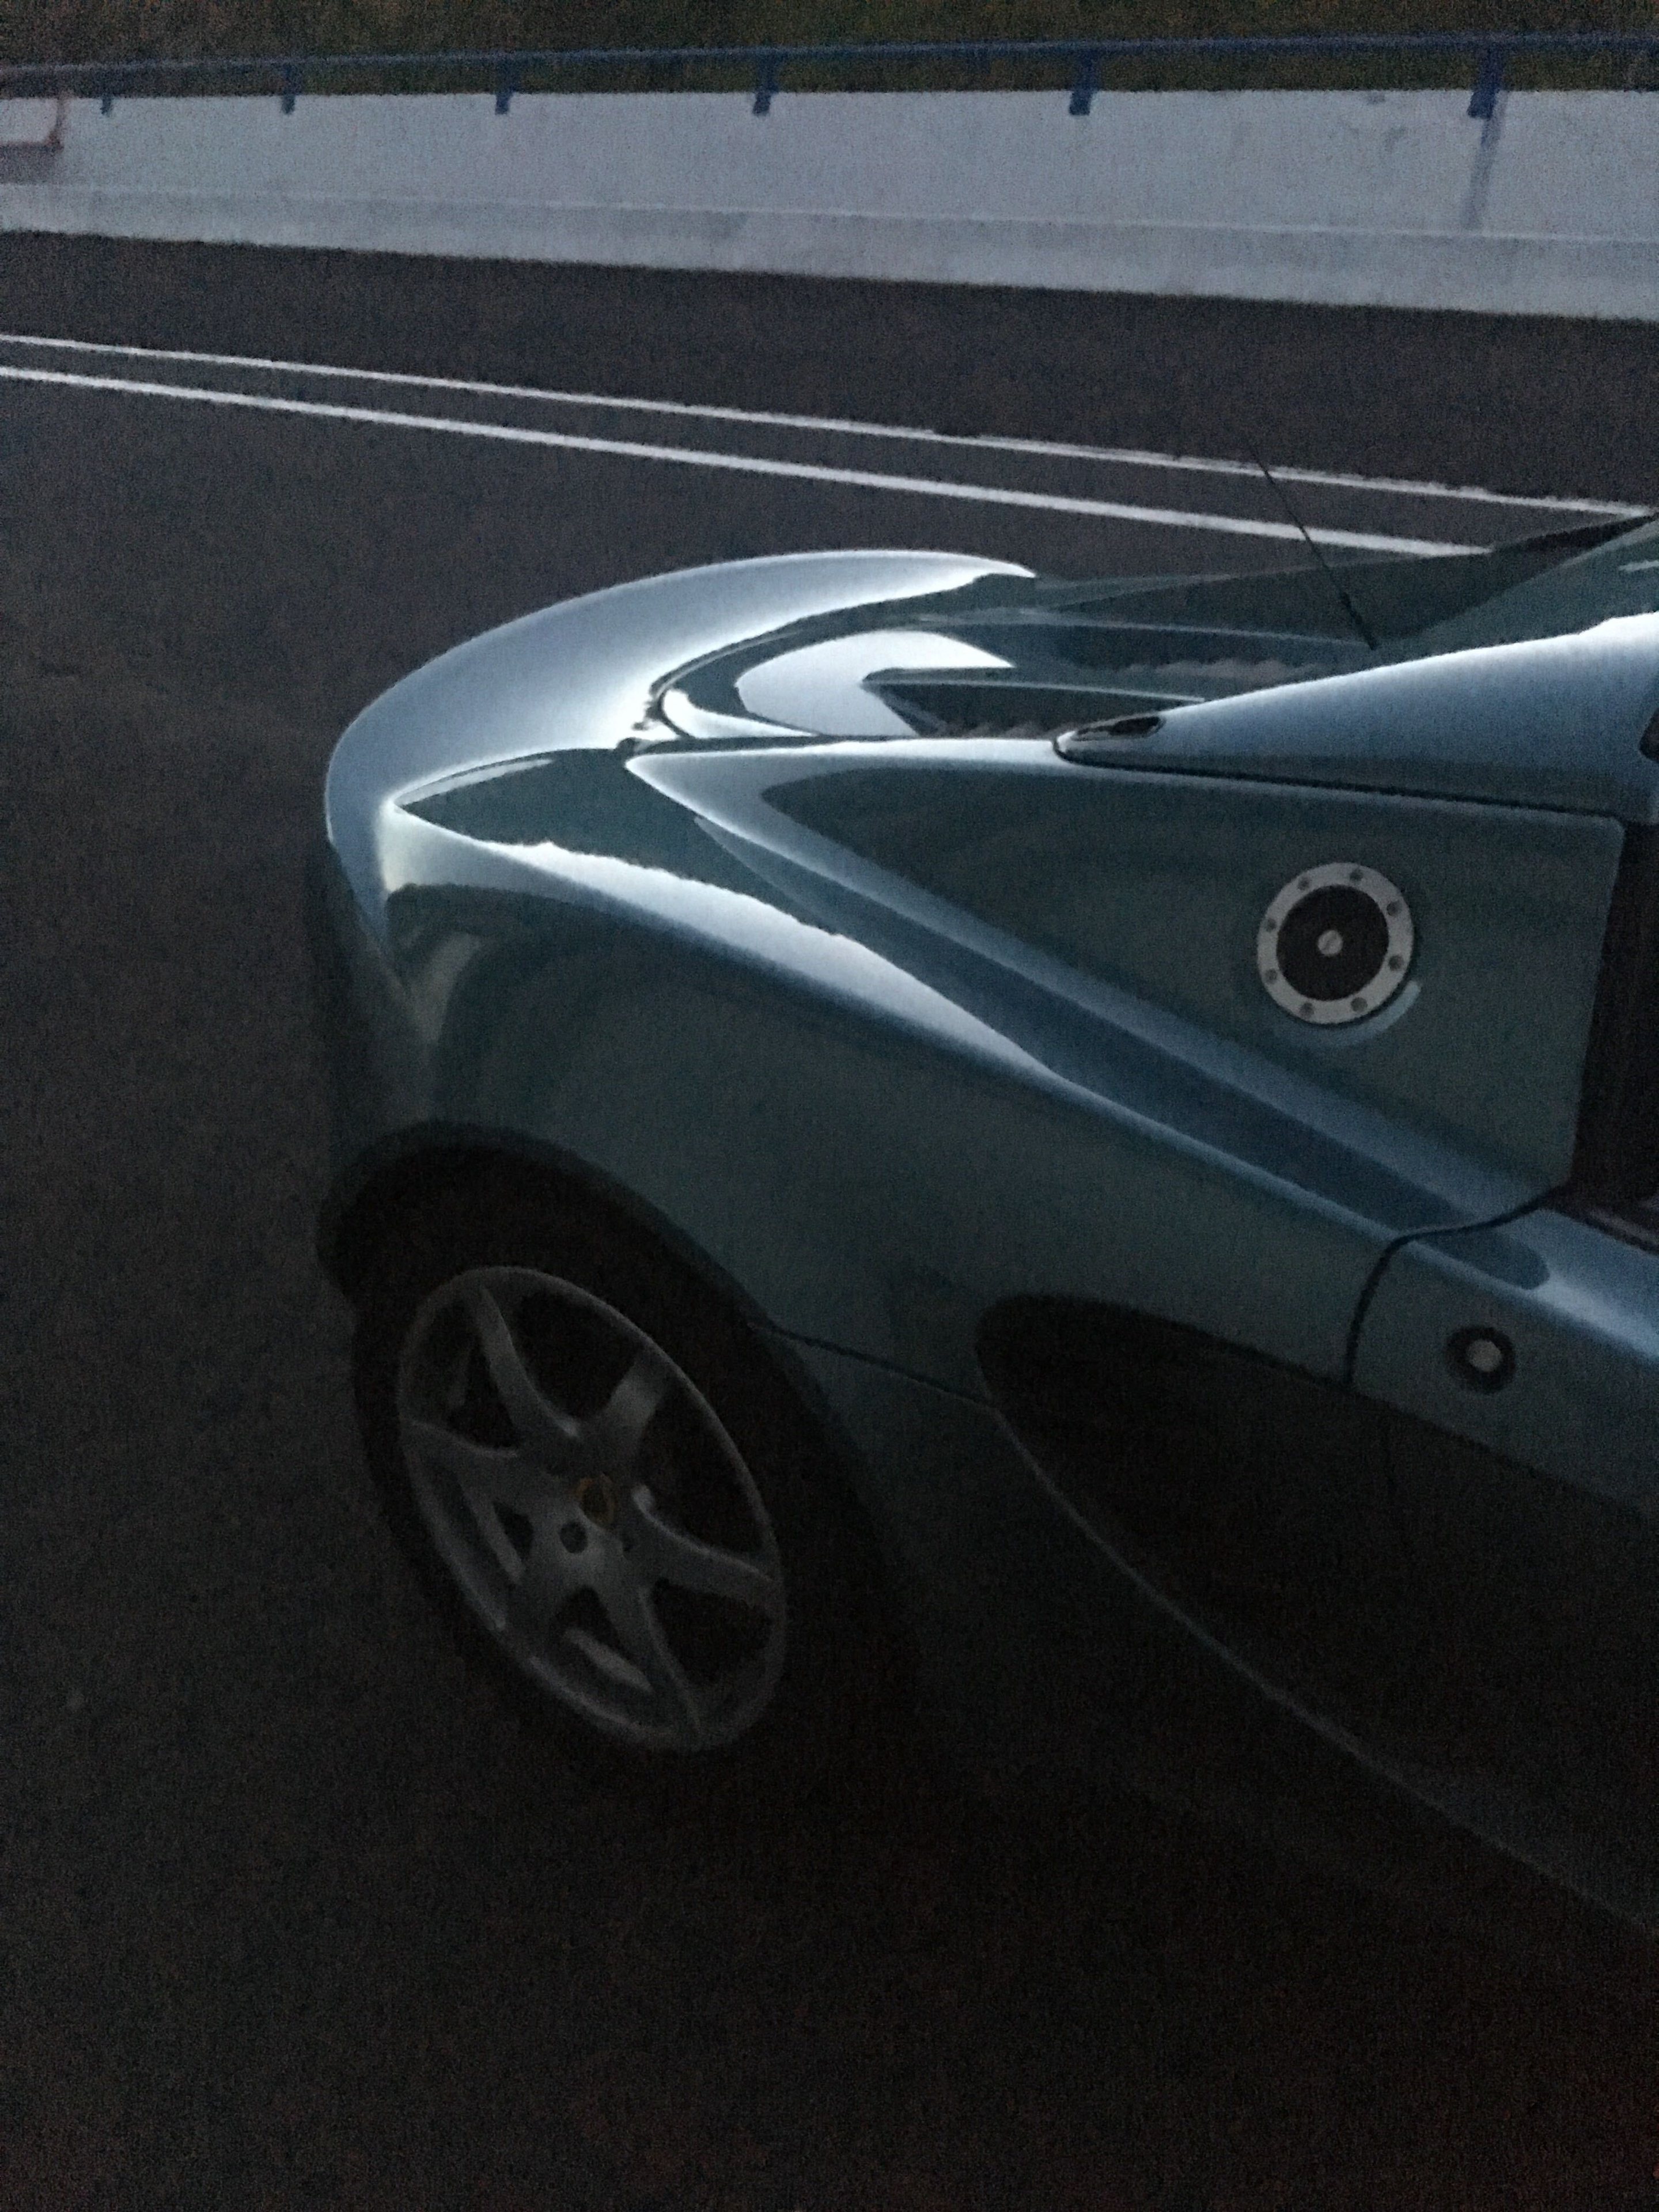 How to achieve financial ruin:  2002 Elise s2  - Page 1 - Readers' Cars - PistonHeads